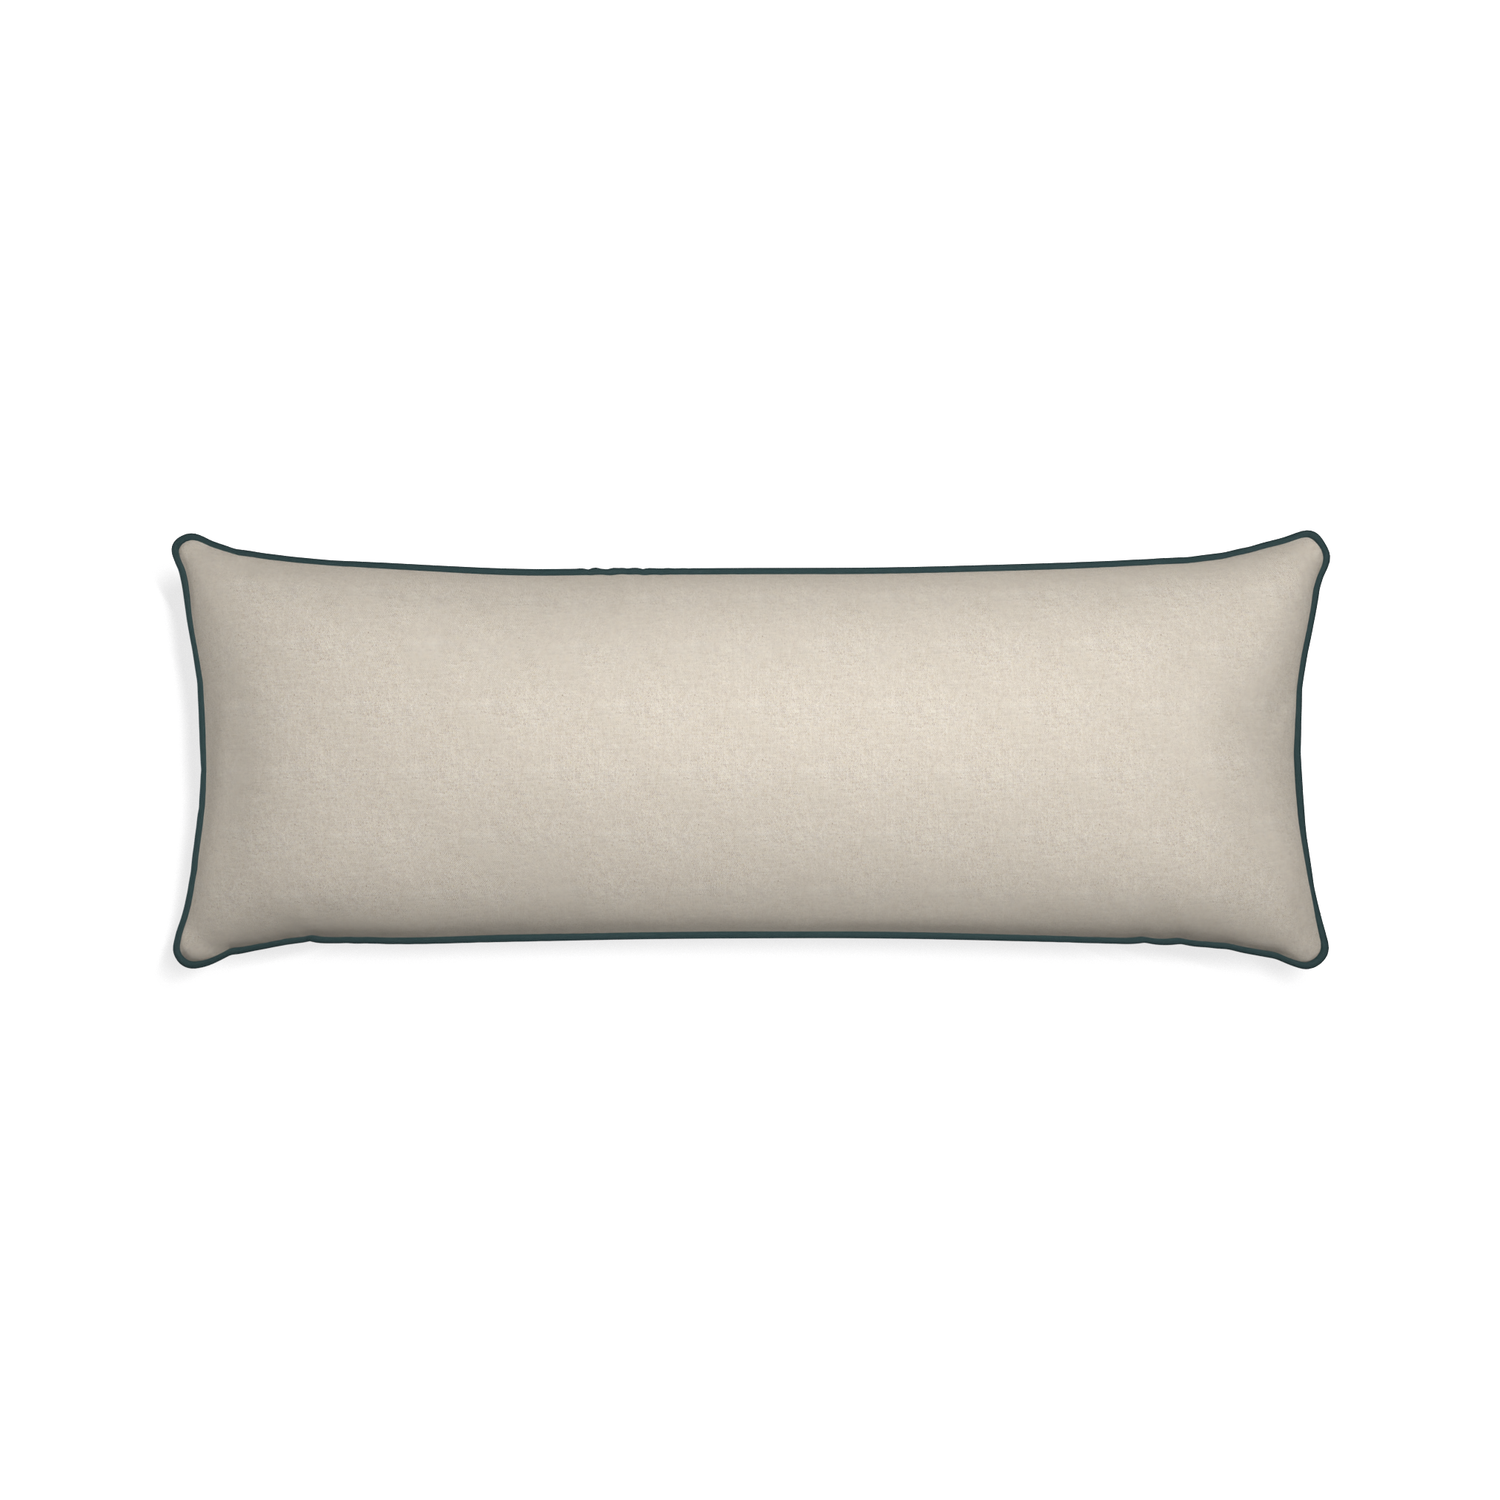 Xl-lumbar oat custom light brownpillow with p piping on white background